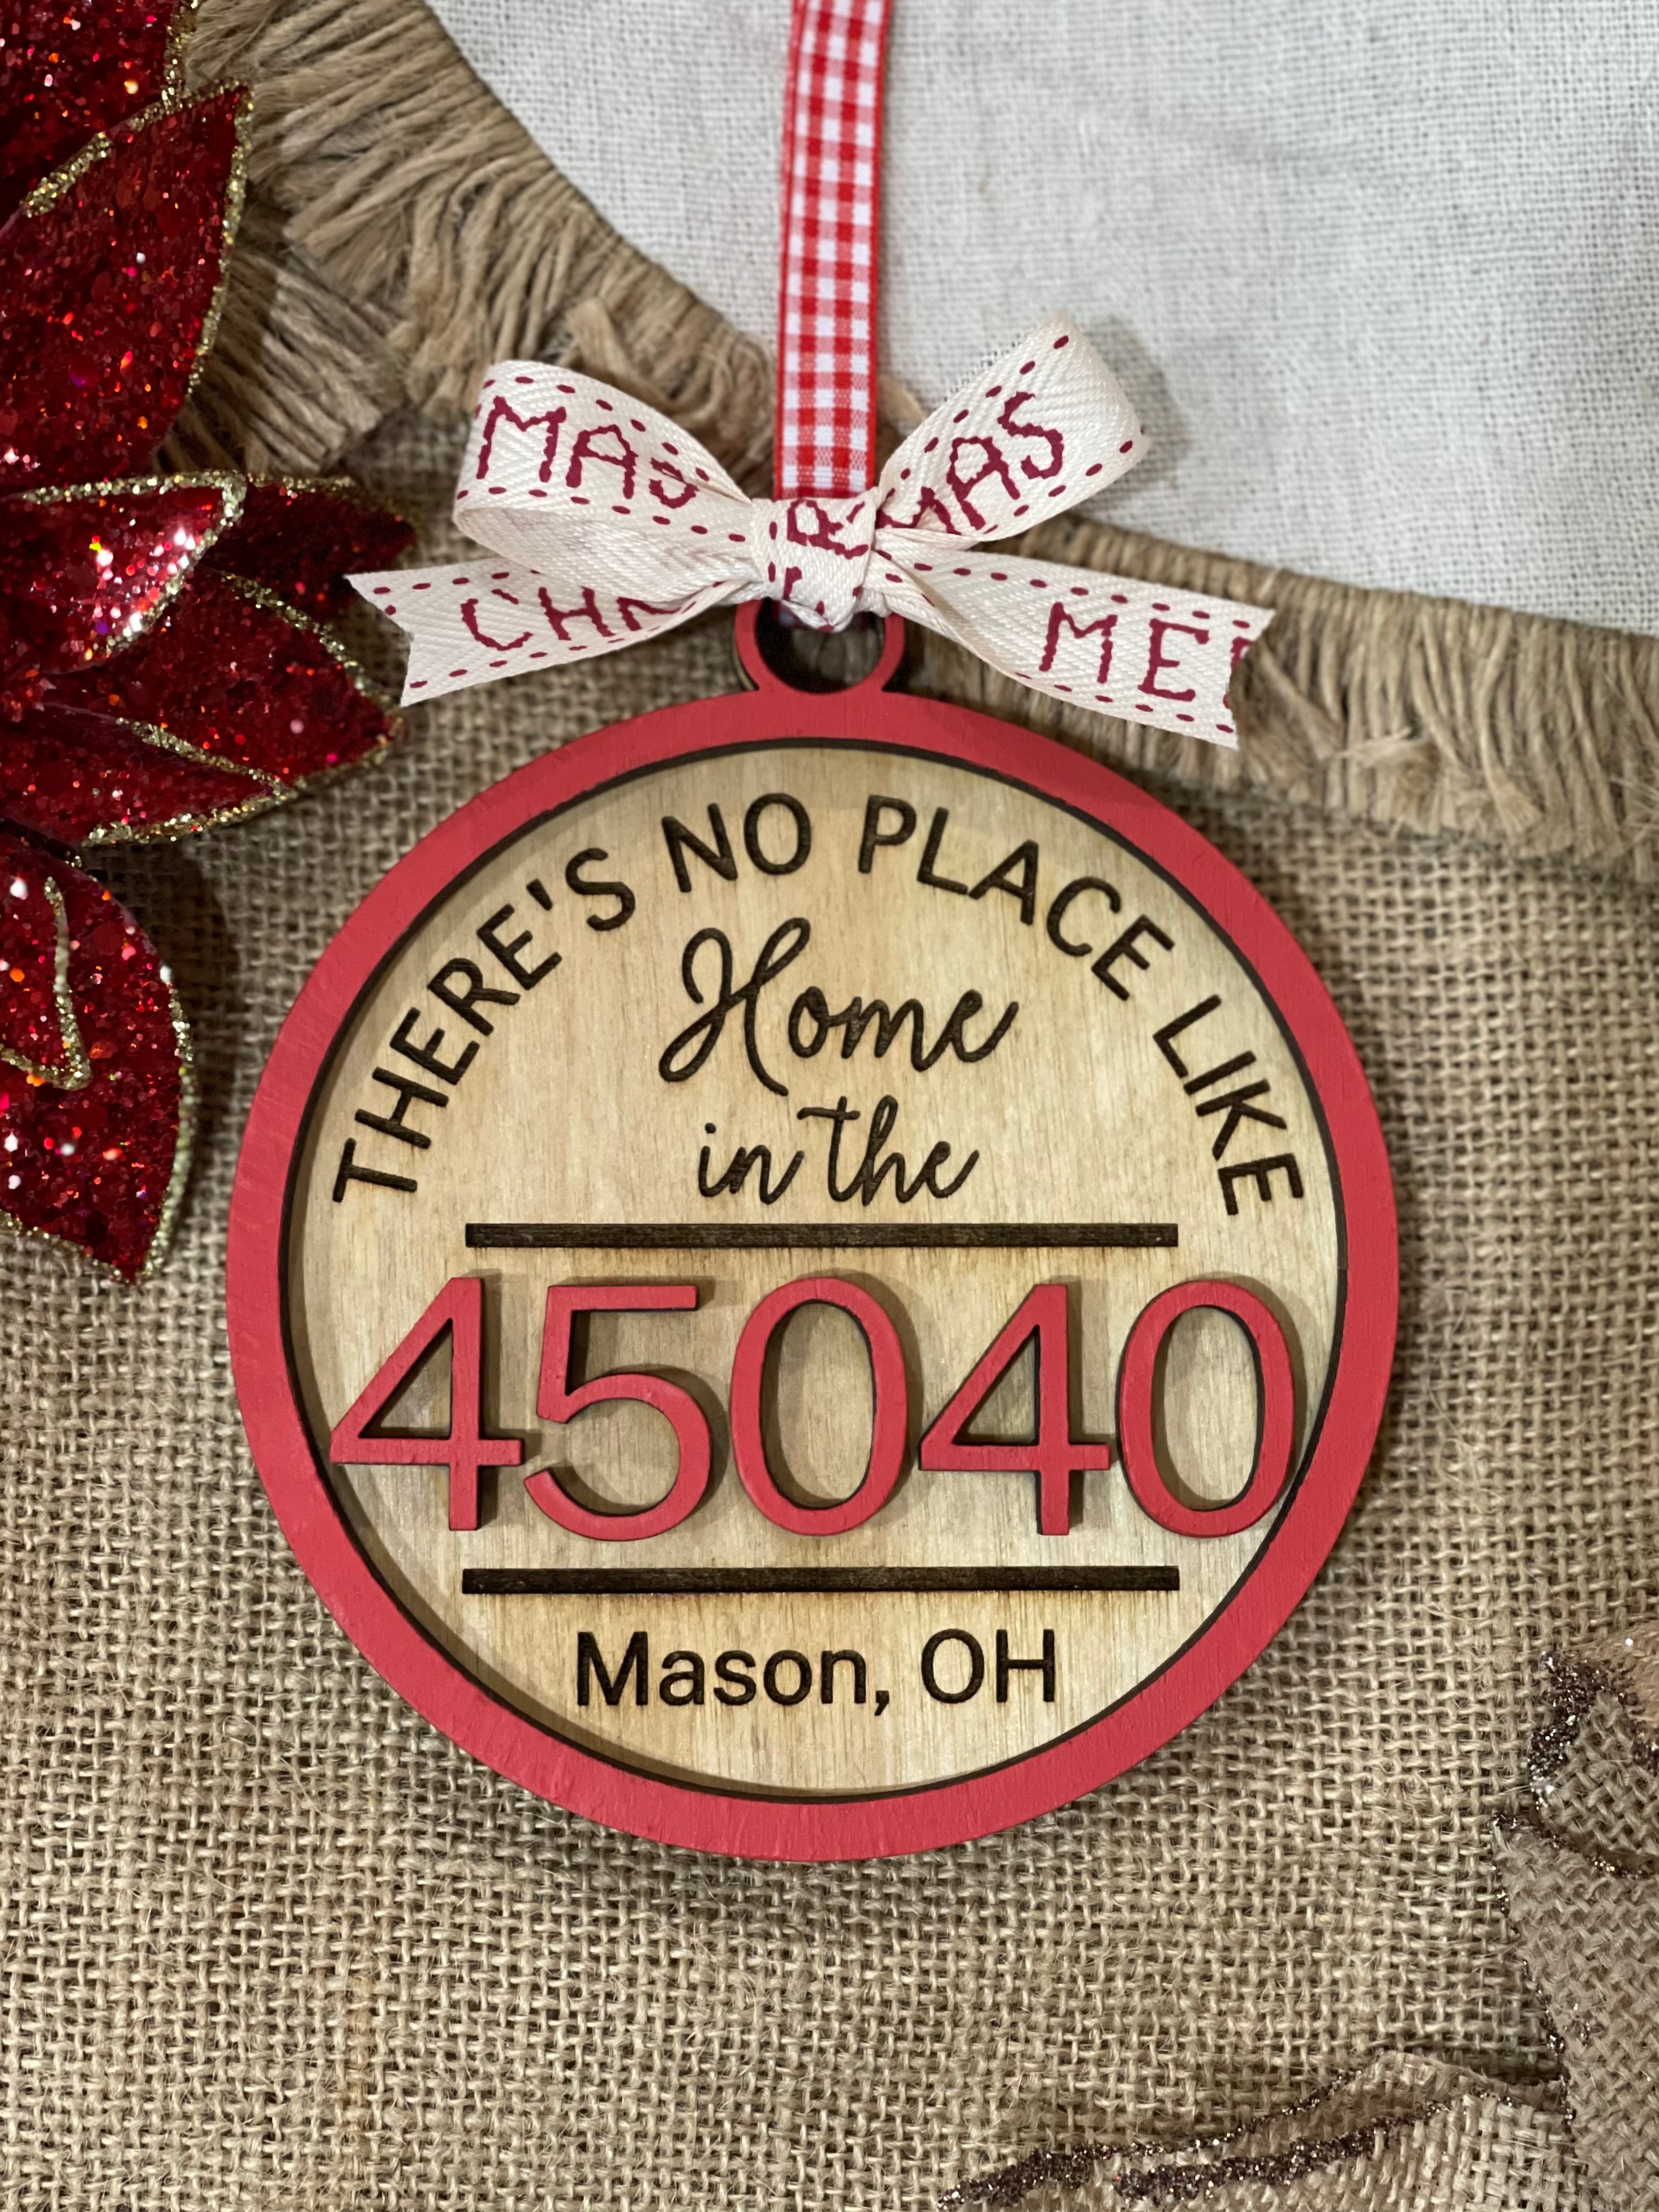 This is an alternate image of the zip code ornament. 